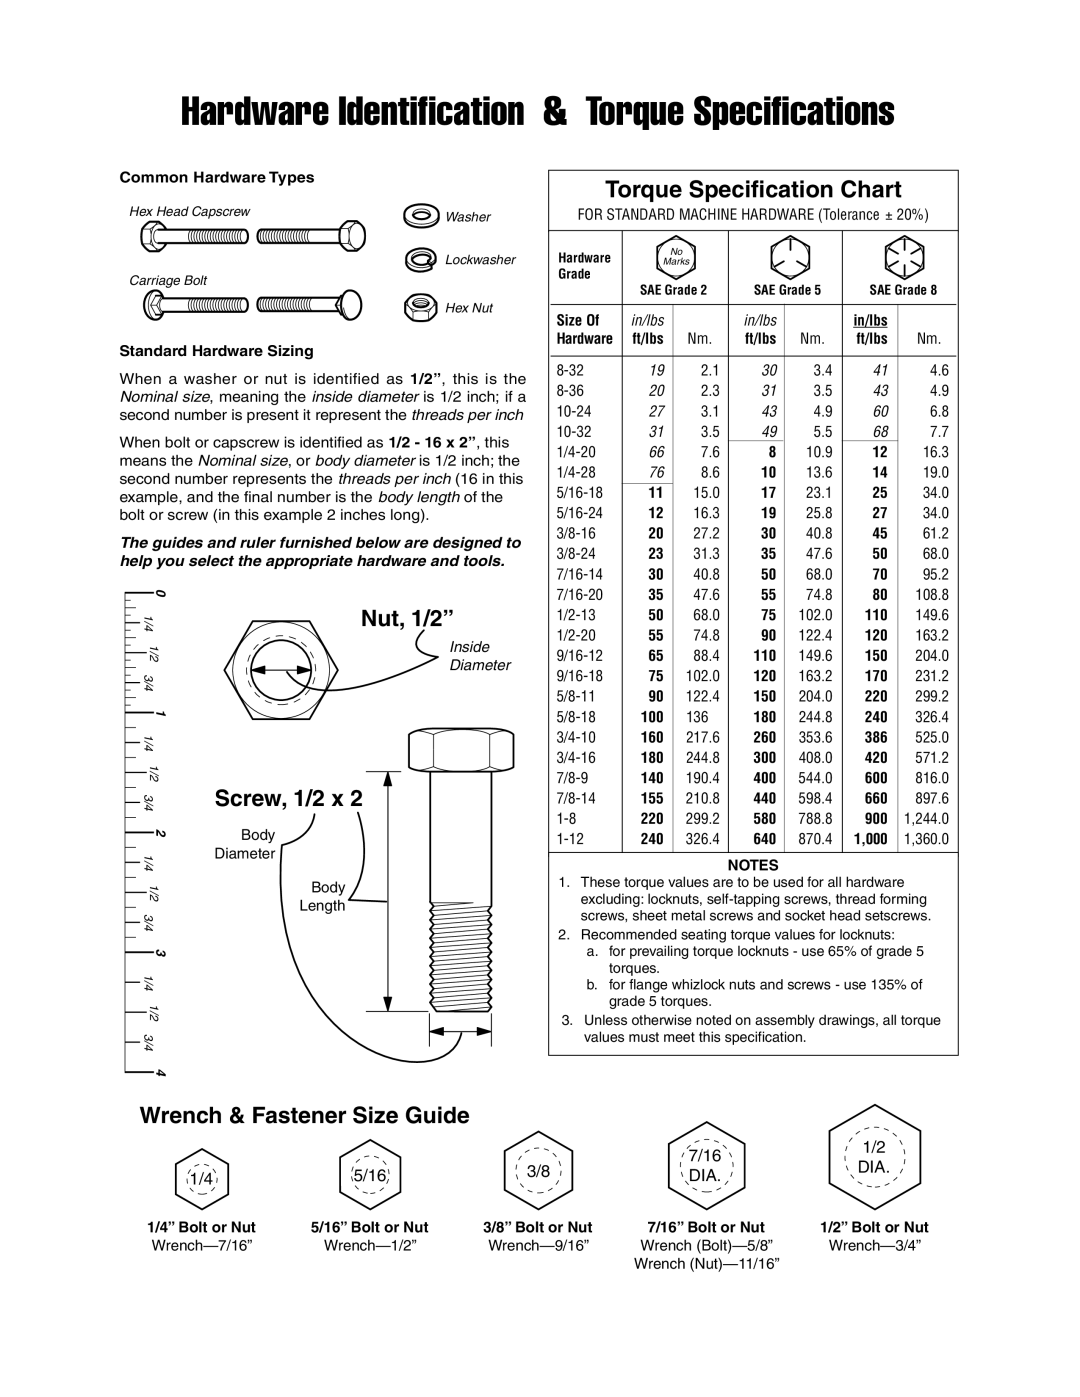 Snapper 4556 Wrench & Fastener Size Guide, Common Hardware Types, Standard Hardware Sizing, Notes, 1/4” Bolt or Nut, 7/16 